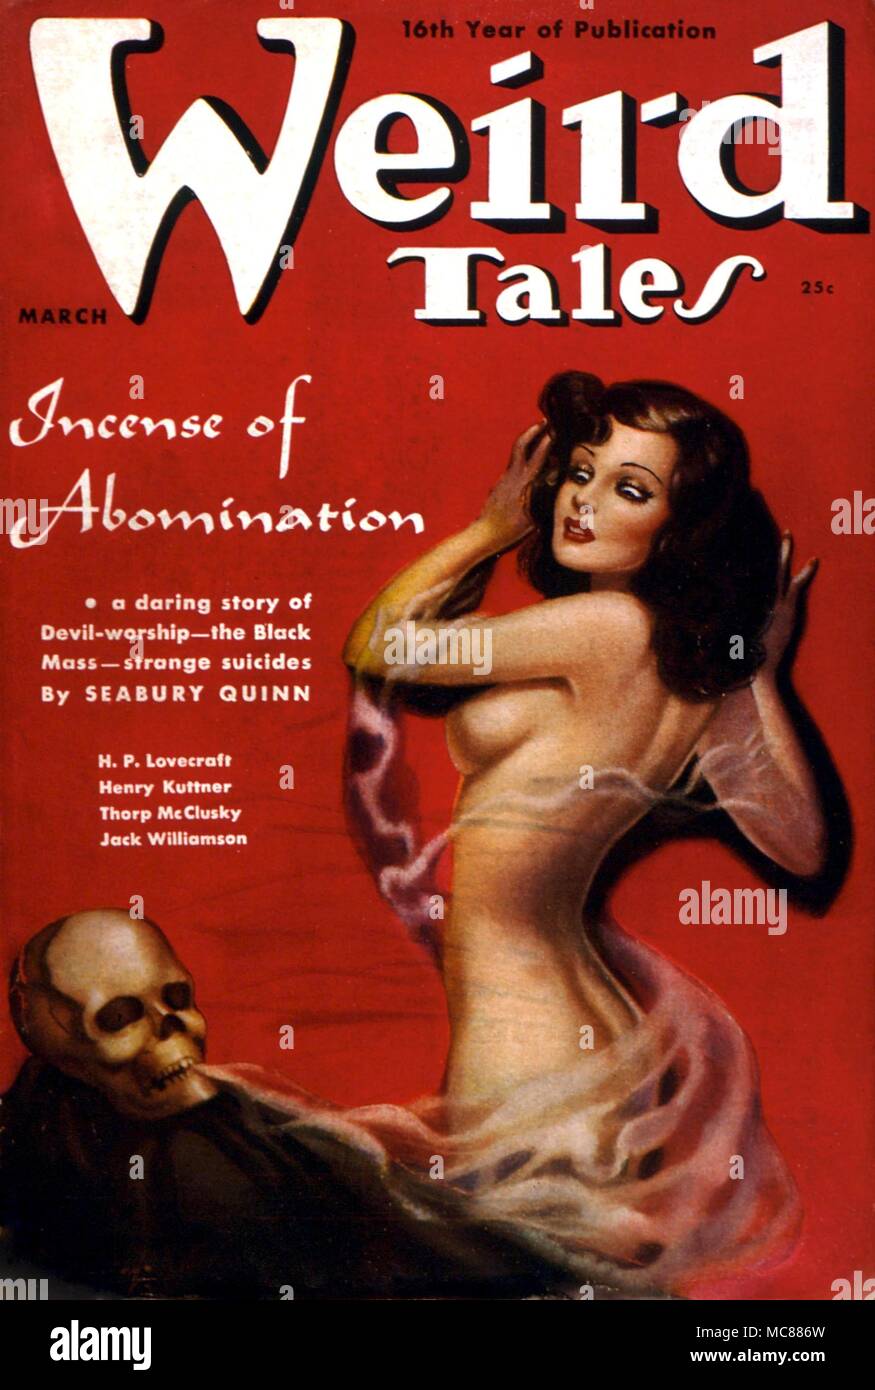 INCENSE 'Incense of Abomination' - artwork for the magazine Weird Tales Science Fiction and Horror Magazines Stock Photo